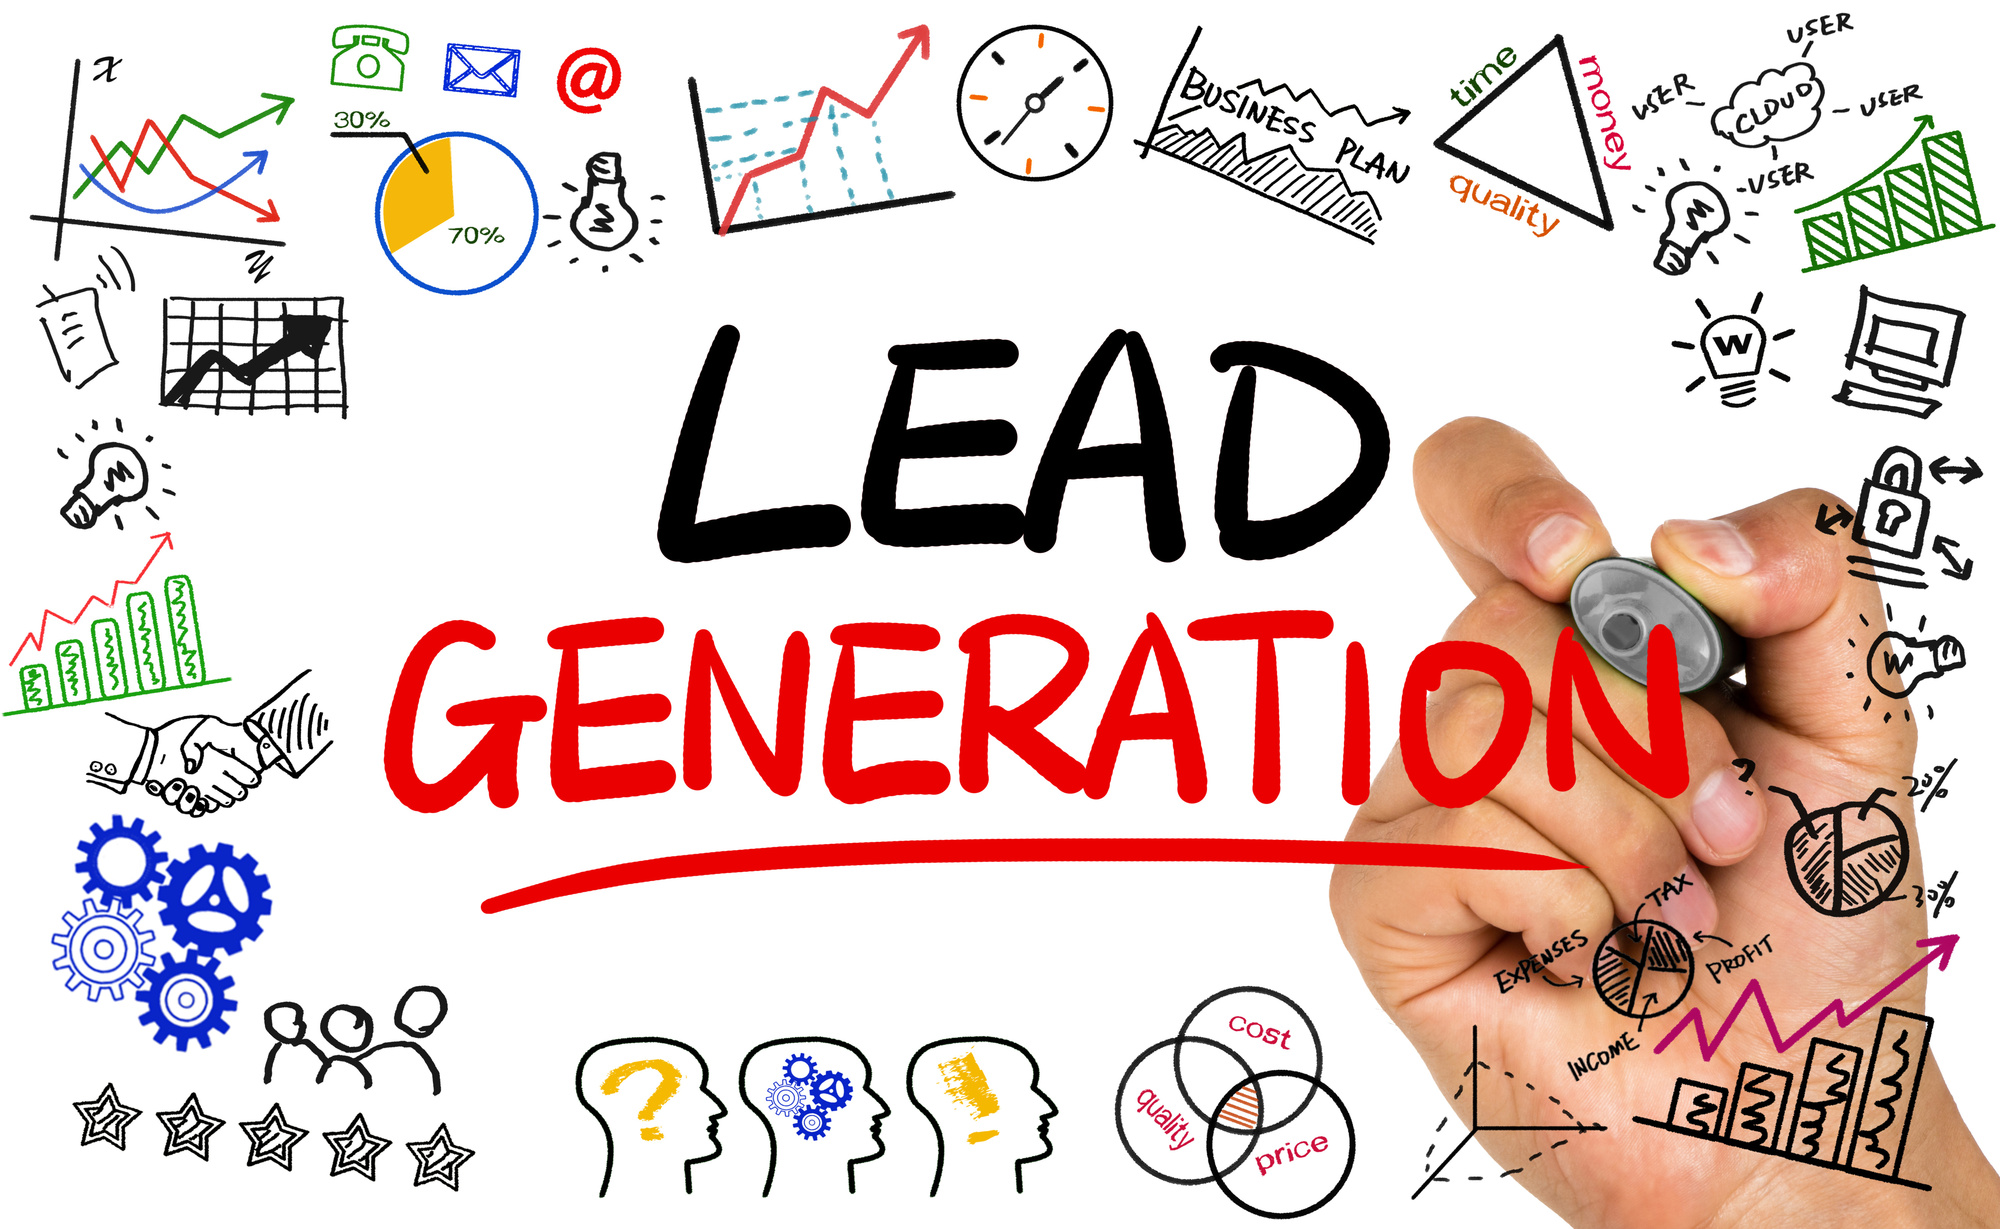 How to generate leads for Real Estate Business